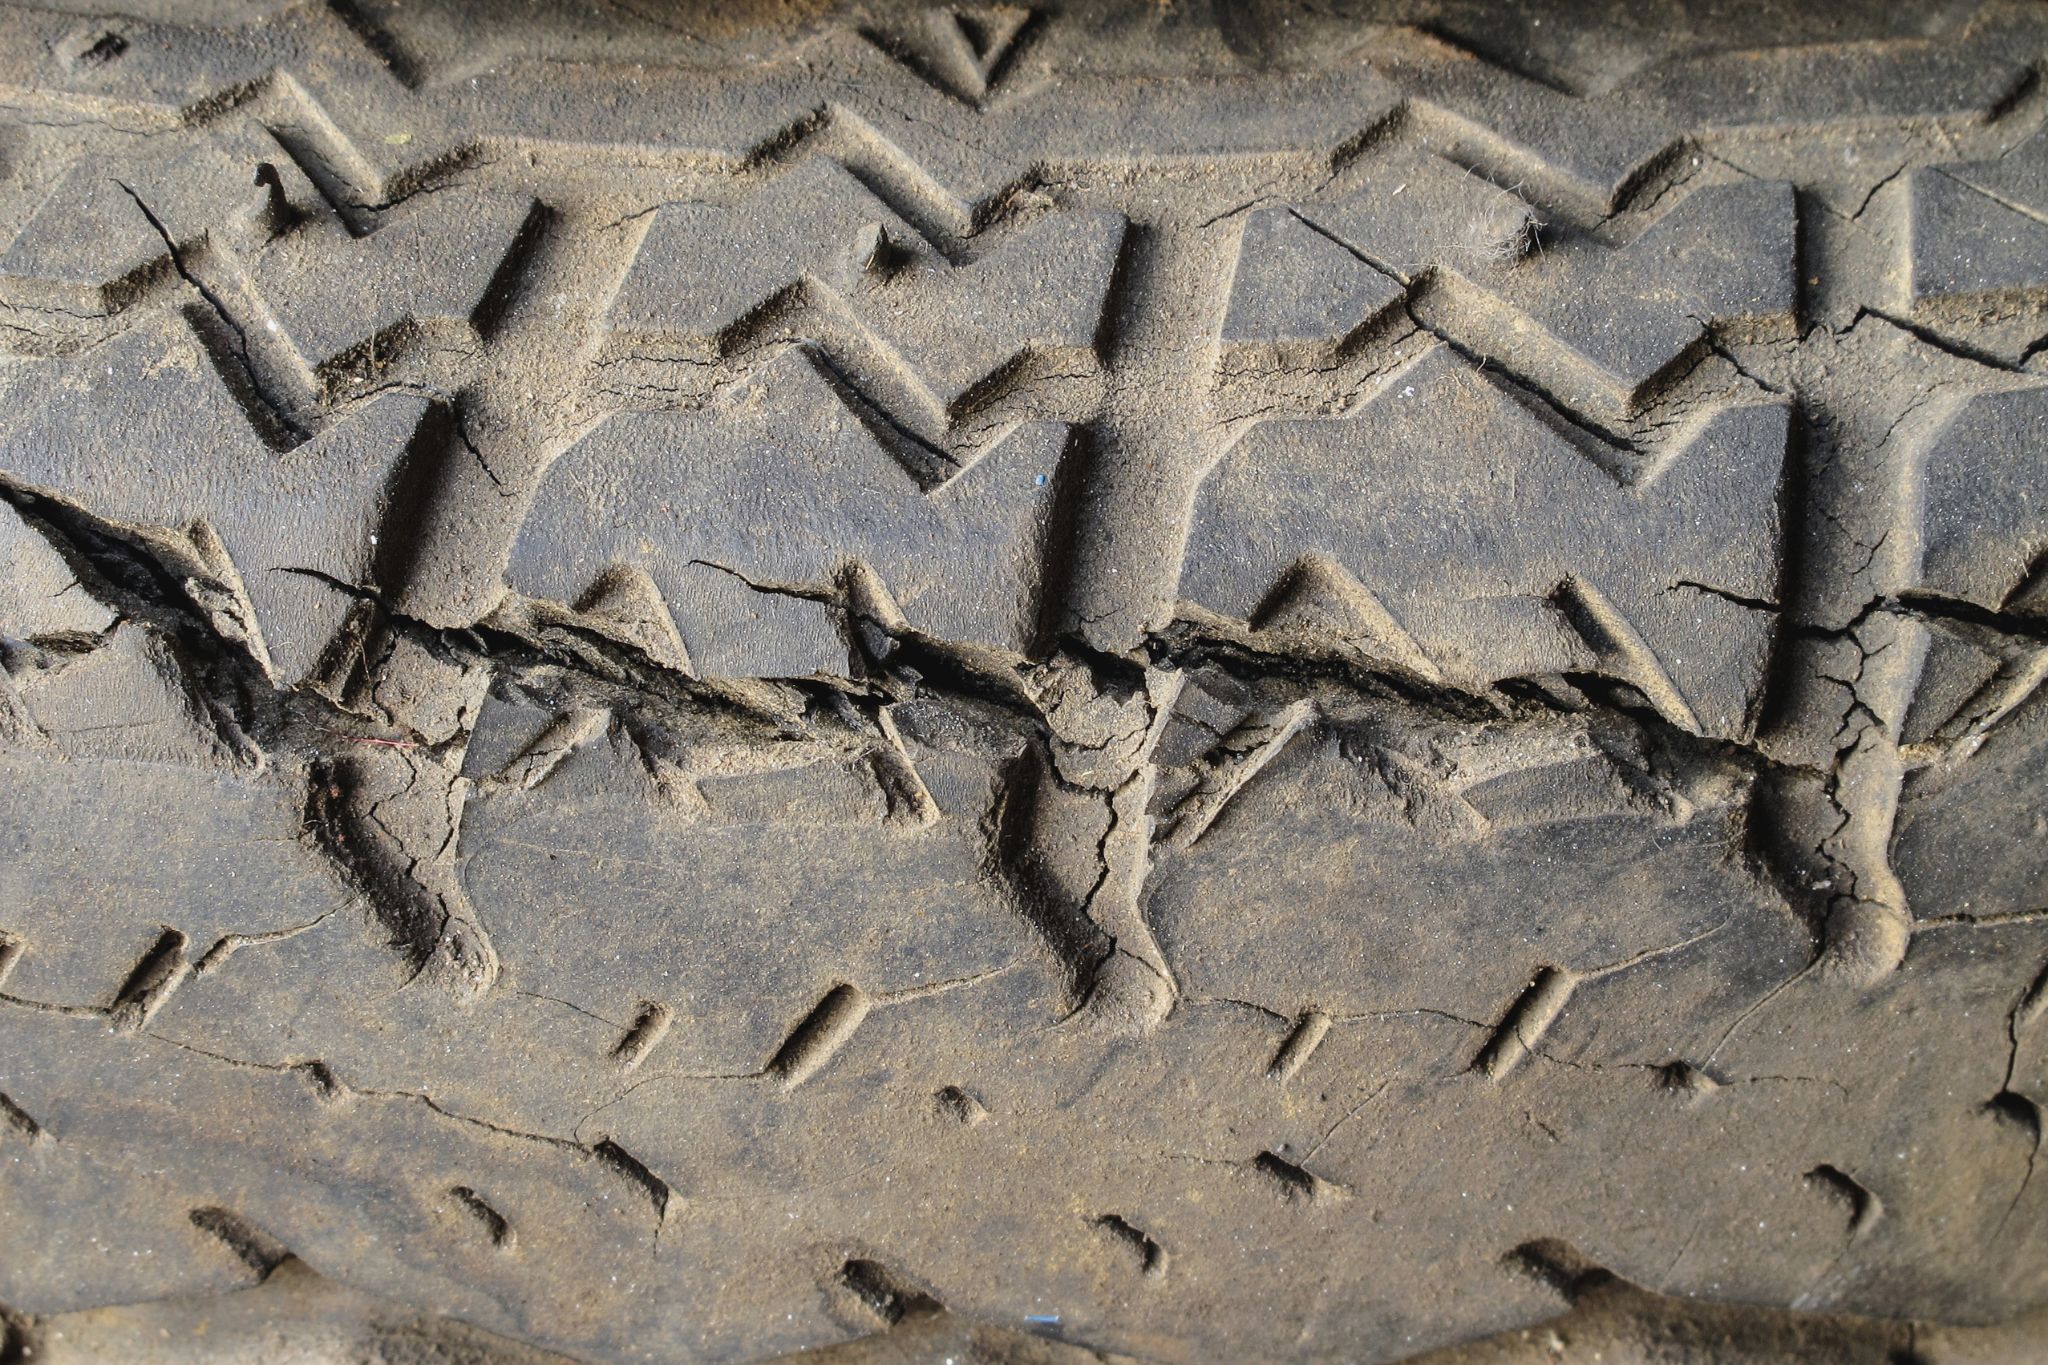 Can You Drive On Cracked Tires?